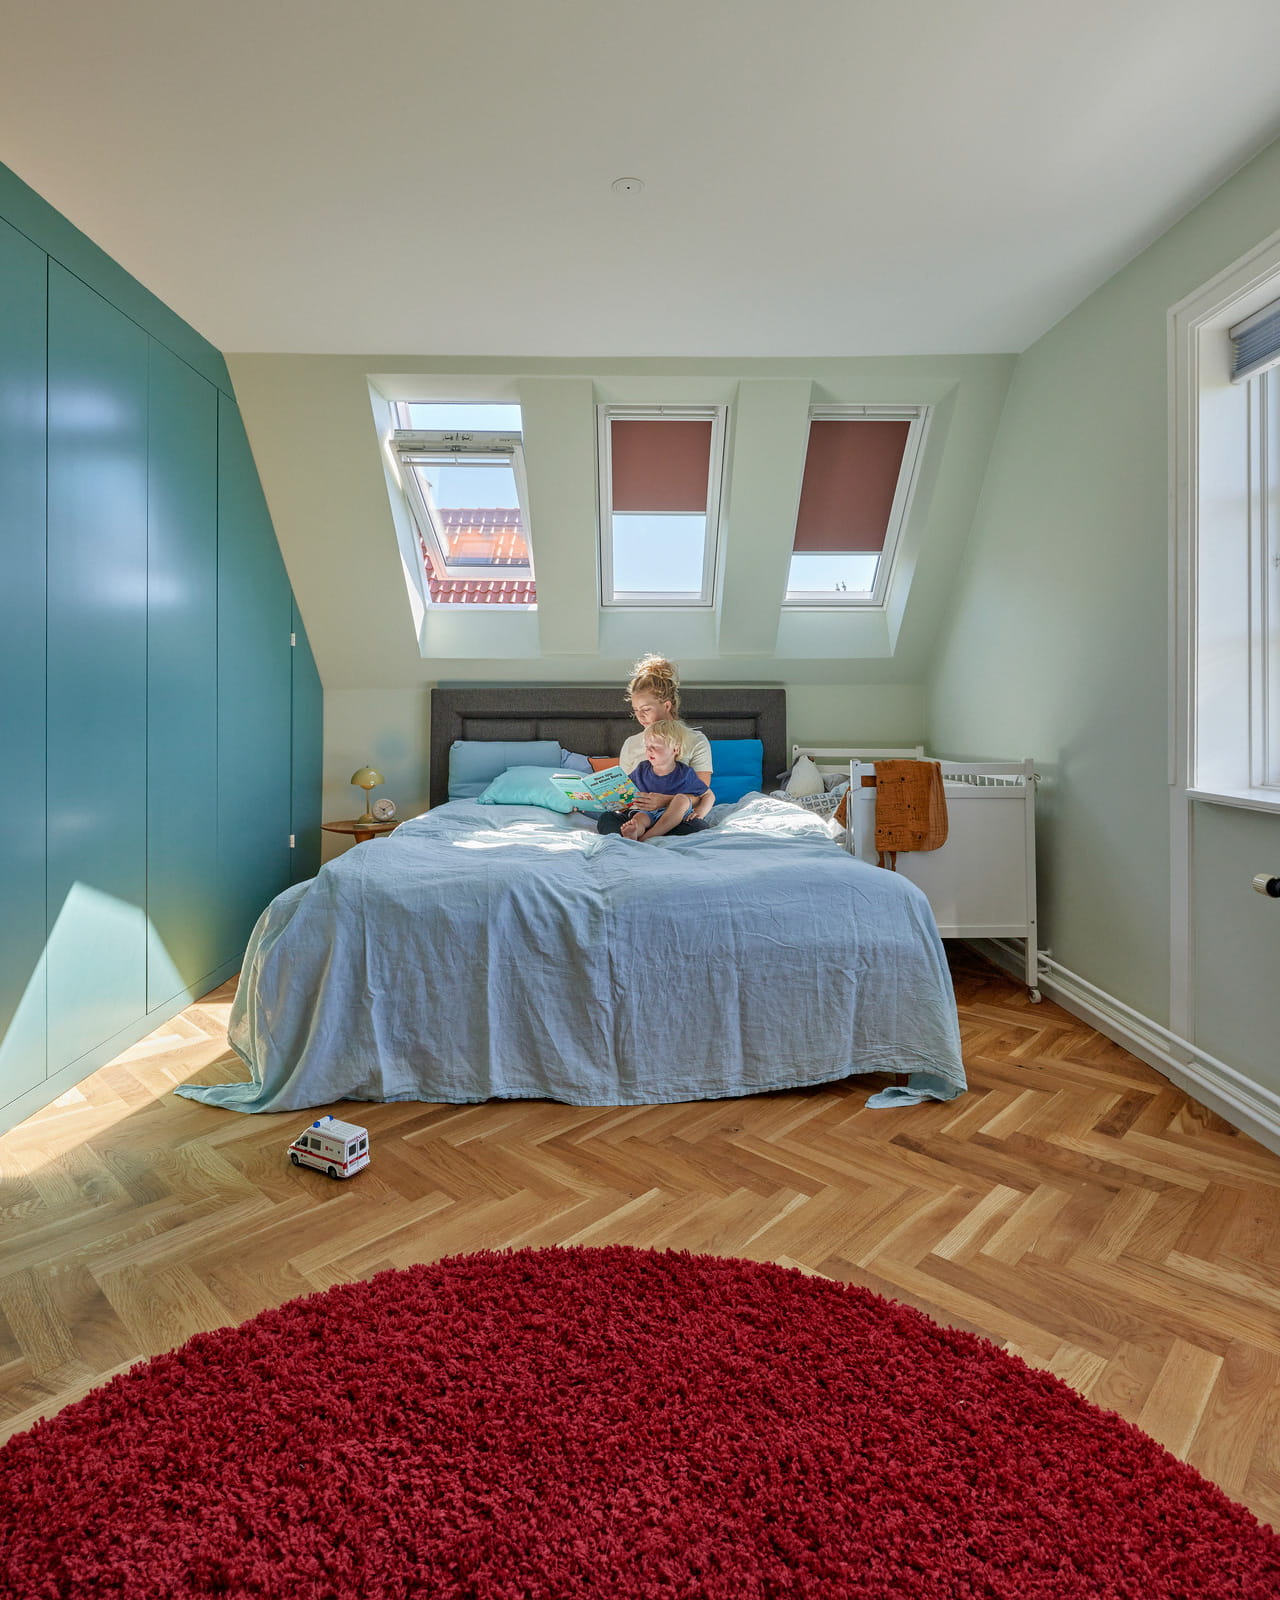 Bright and colourful bedroom with a person sitting on the bed.